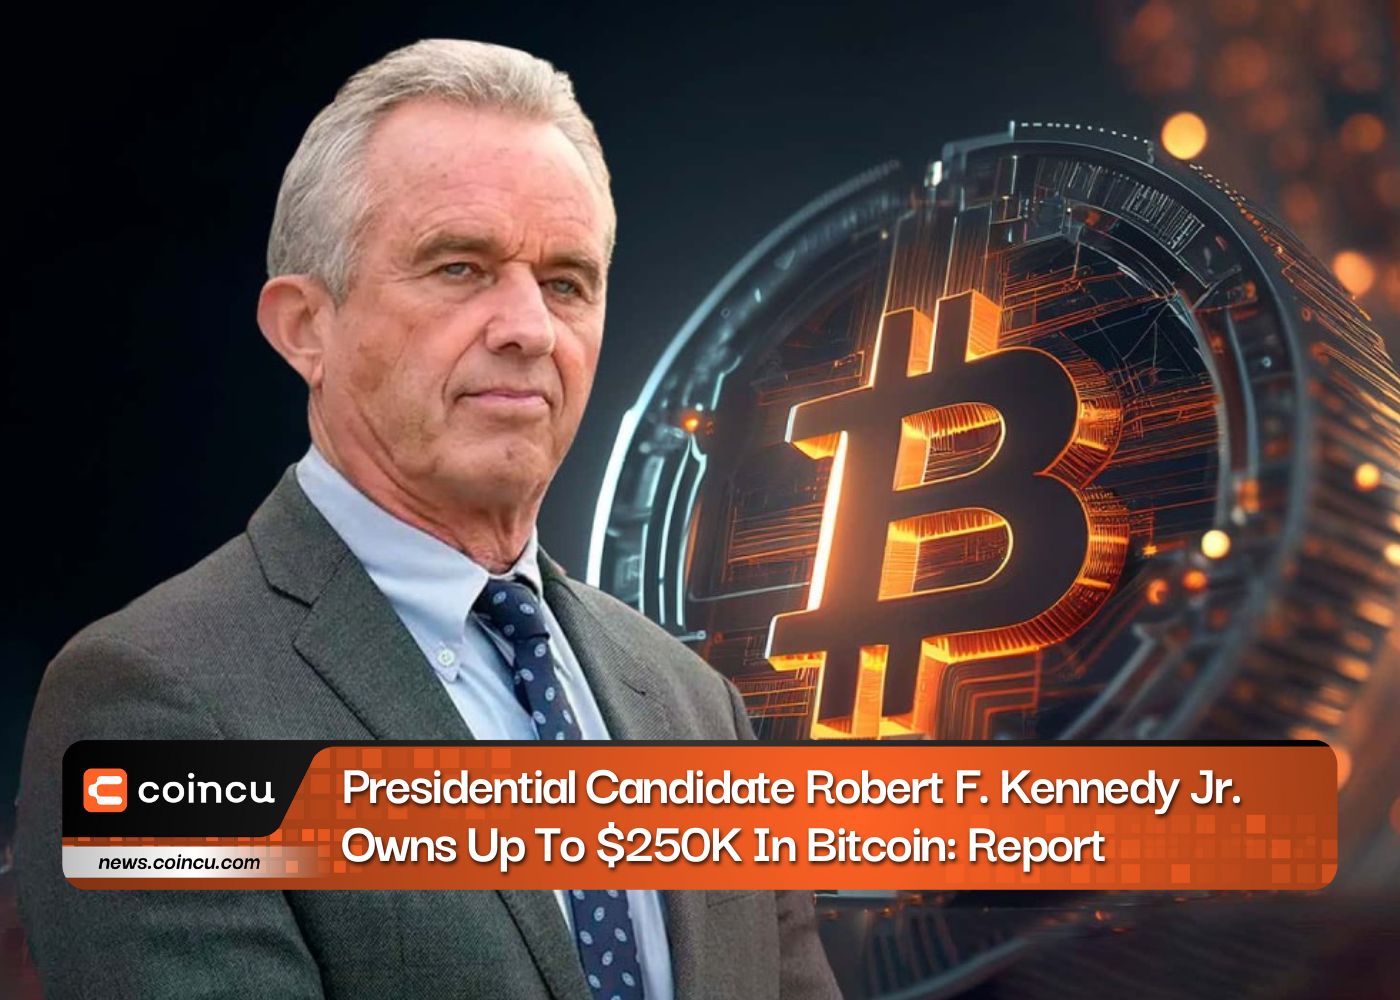 Presidential Candidate Robert F. Kennedy Jr. Owns Up To $250K In Bitcoin: Report